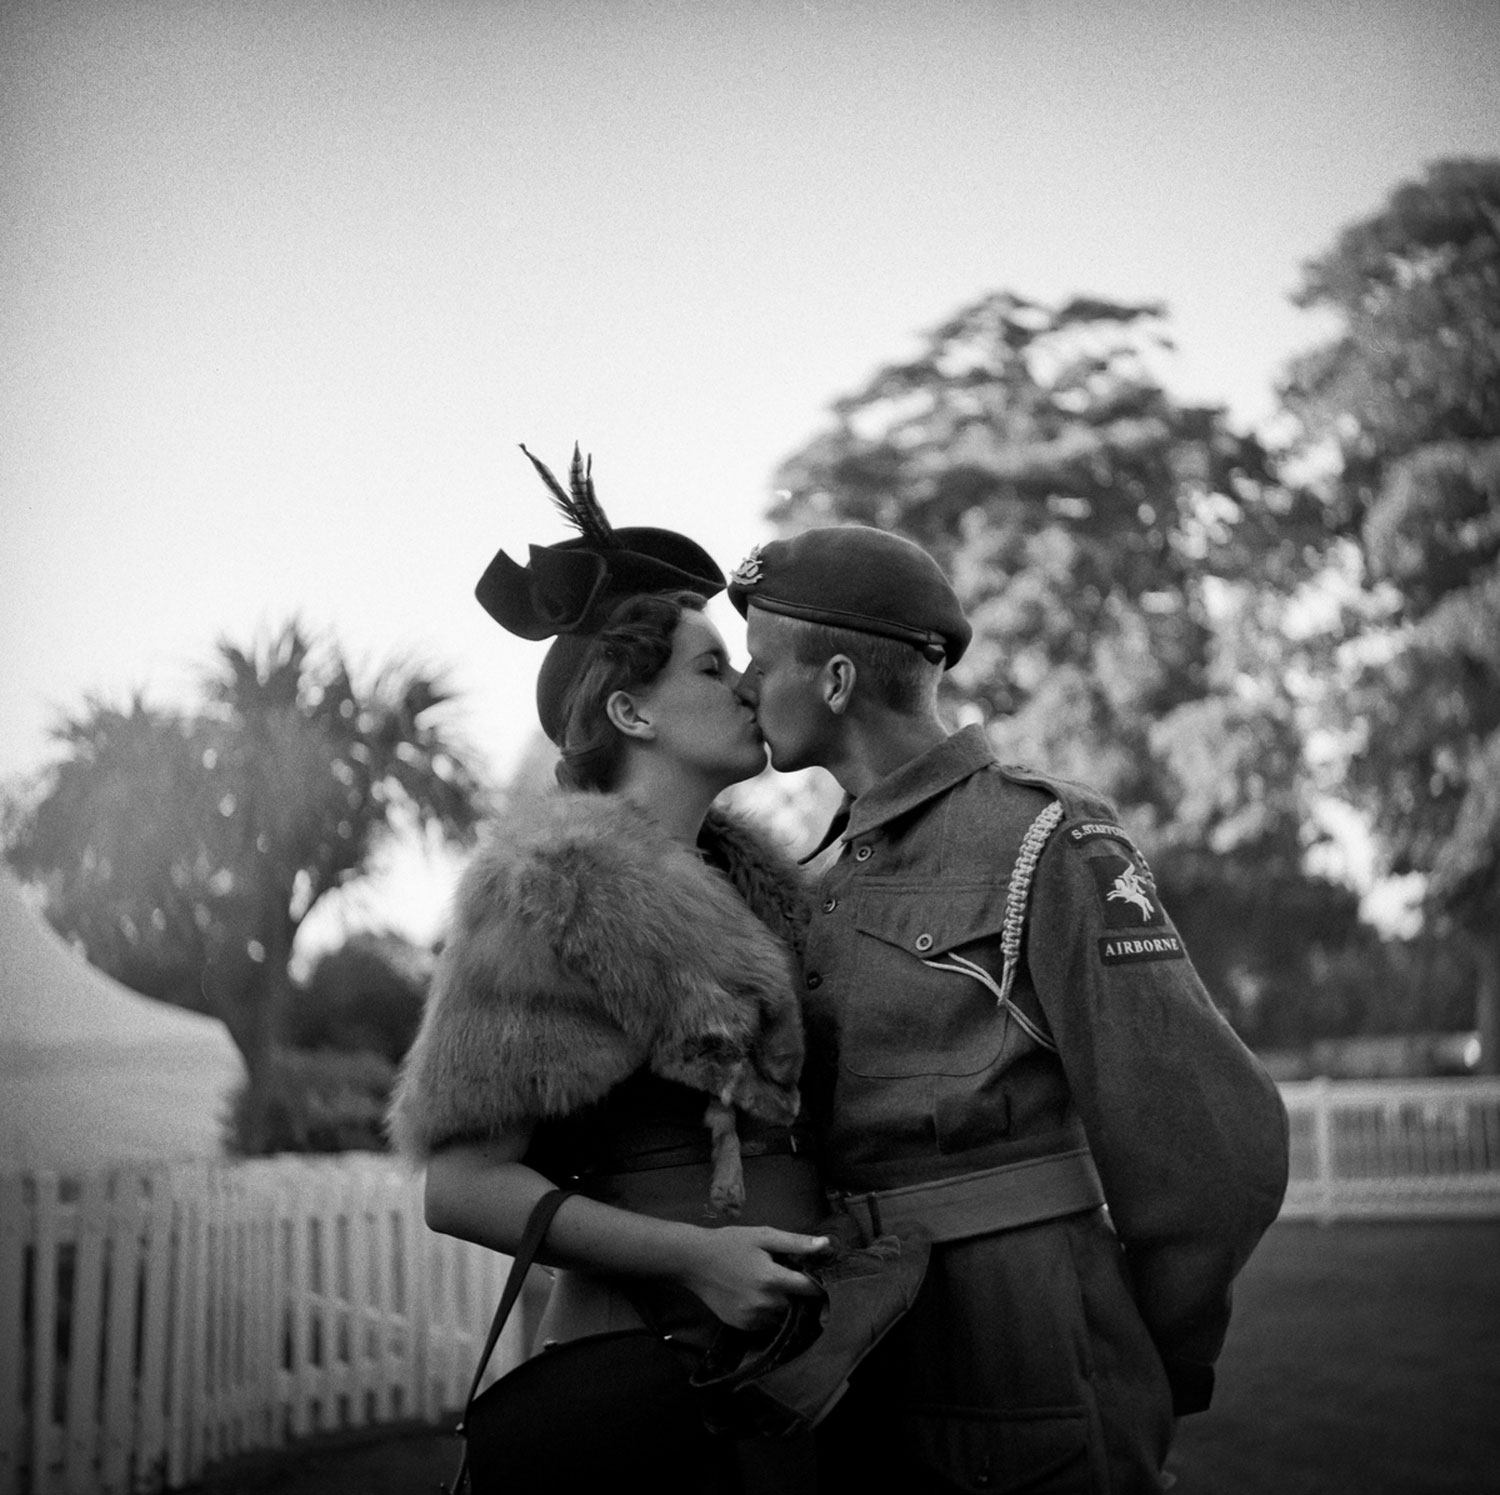 Young reenactors Laura Blanchard and Ieuan Joe Smith (who's dressed as a Private, C Company, 2nd Battalion South Staffordshire Regiment, British 1st Airborne Division) share a kiss at the War & Peace Revival in Folkestone, England on July 17, 2013.